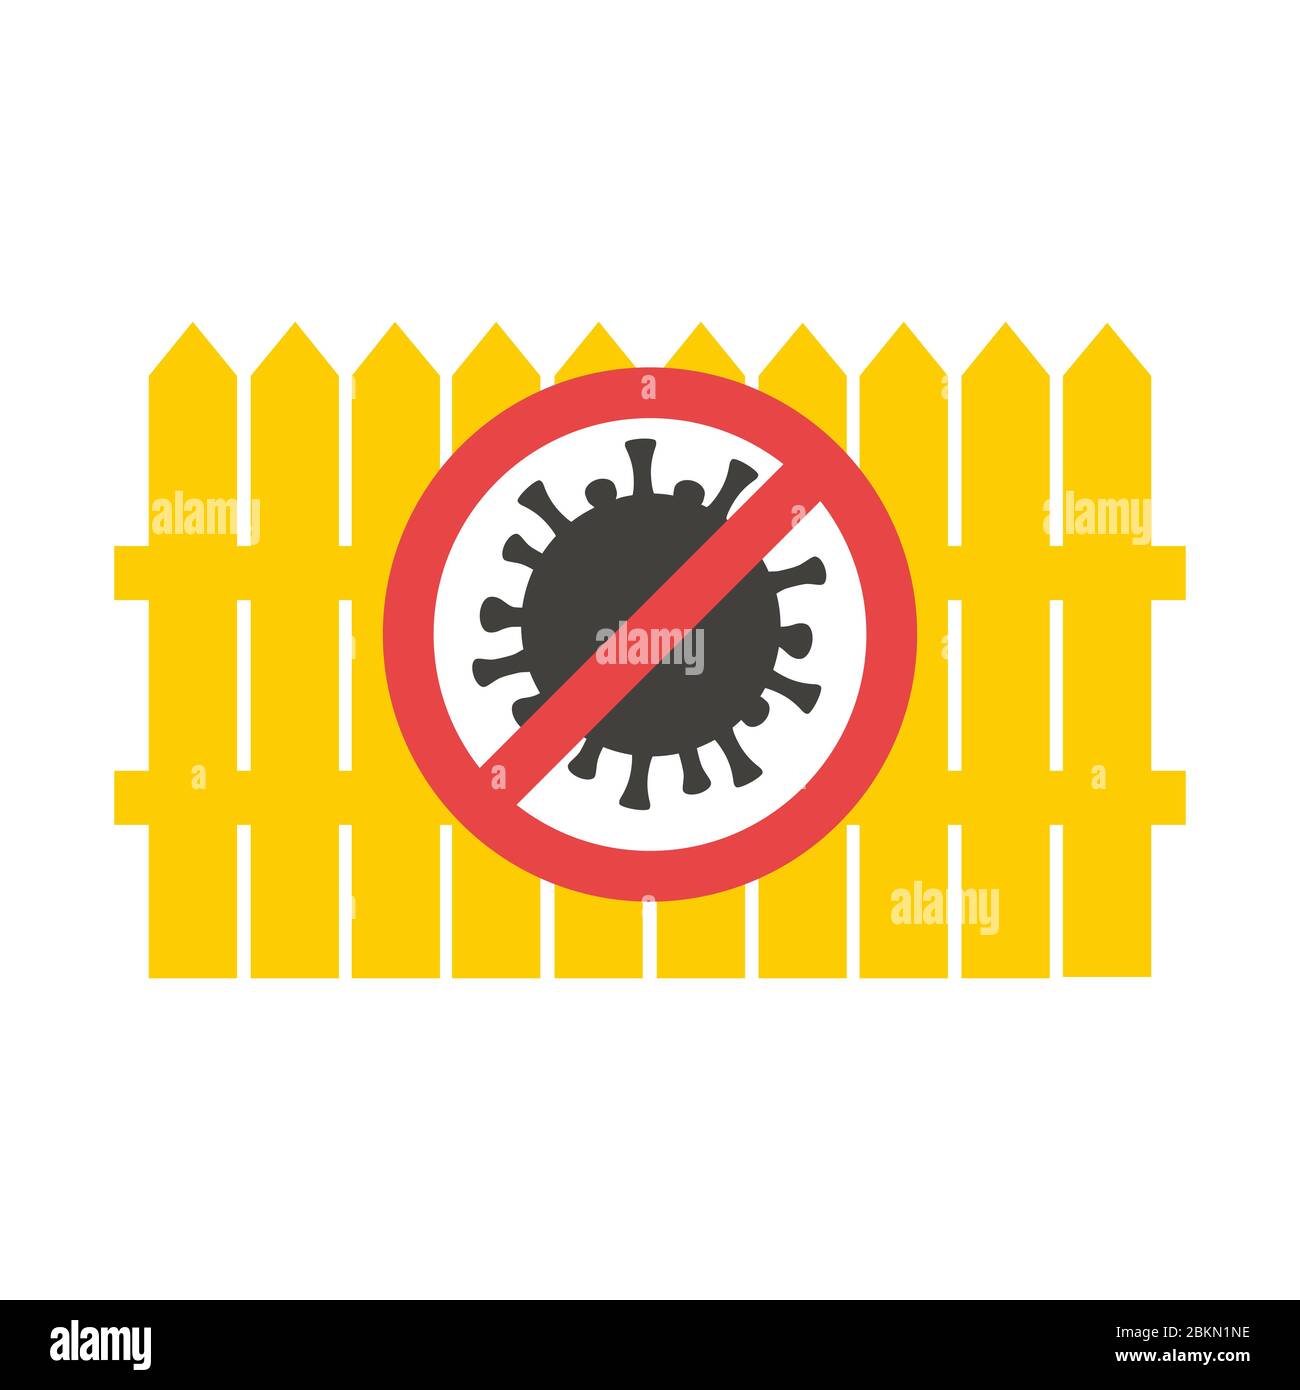 Stop coronavirus concept vector illustration. Yellow fence with prohibition sign. Barrier for infection transmission. Stock Vector